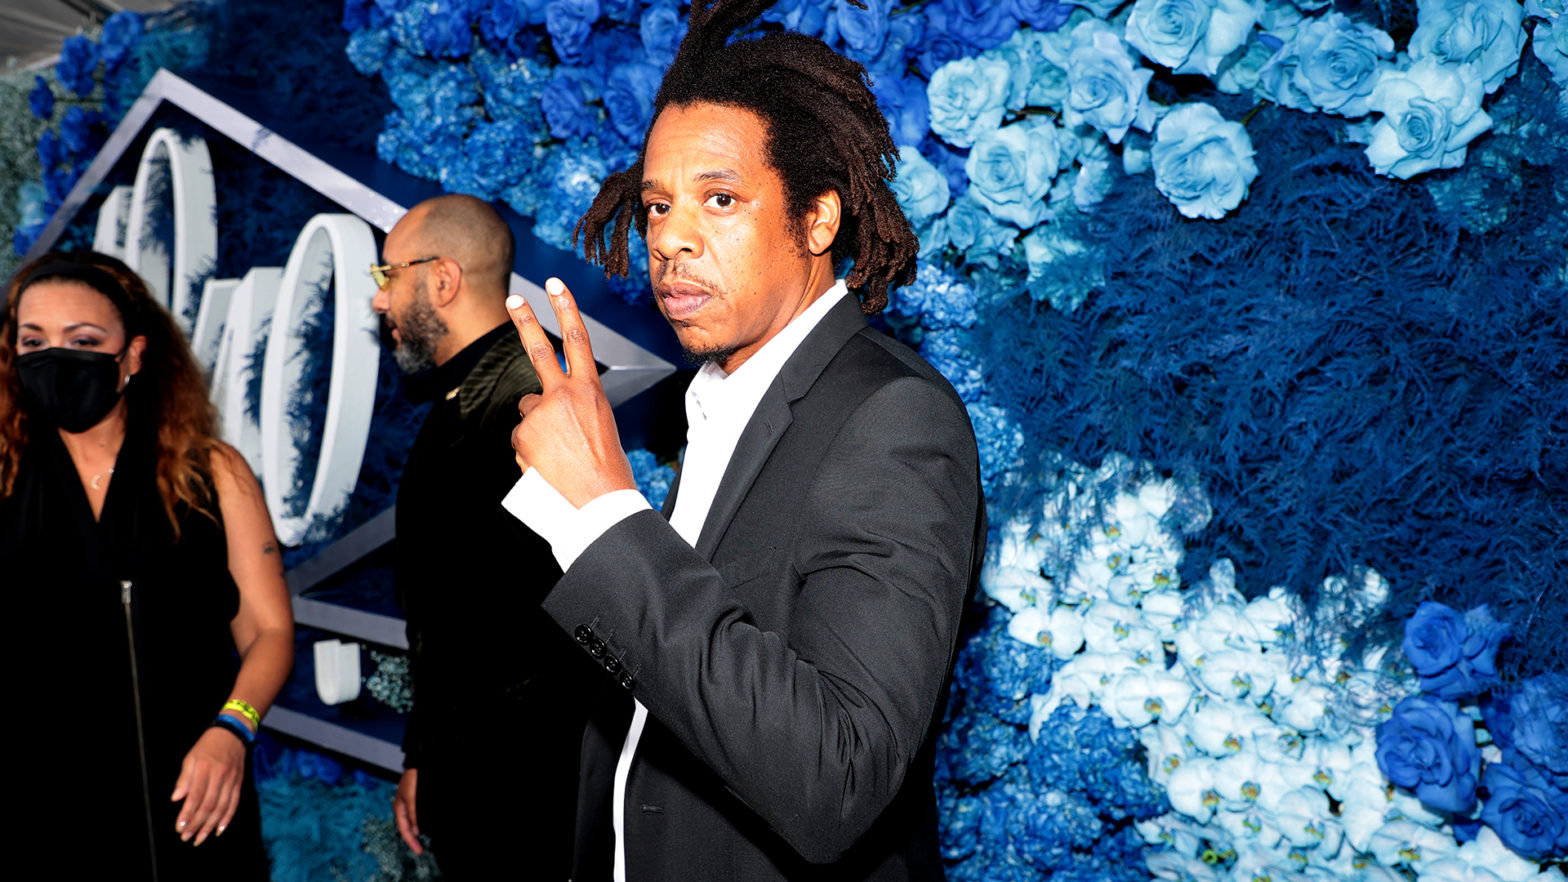 Jay-Z Invests In Flowhub, A Cannabis Tech Company With A Valuation Of Over $200M